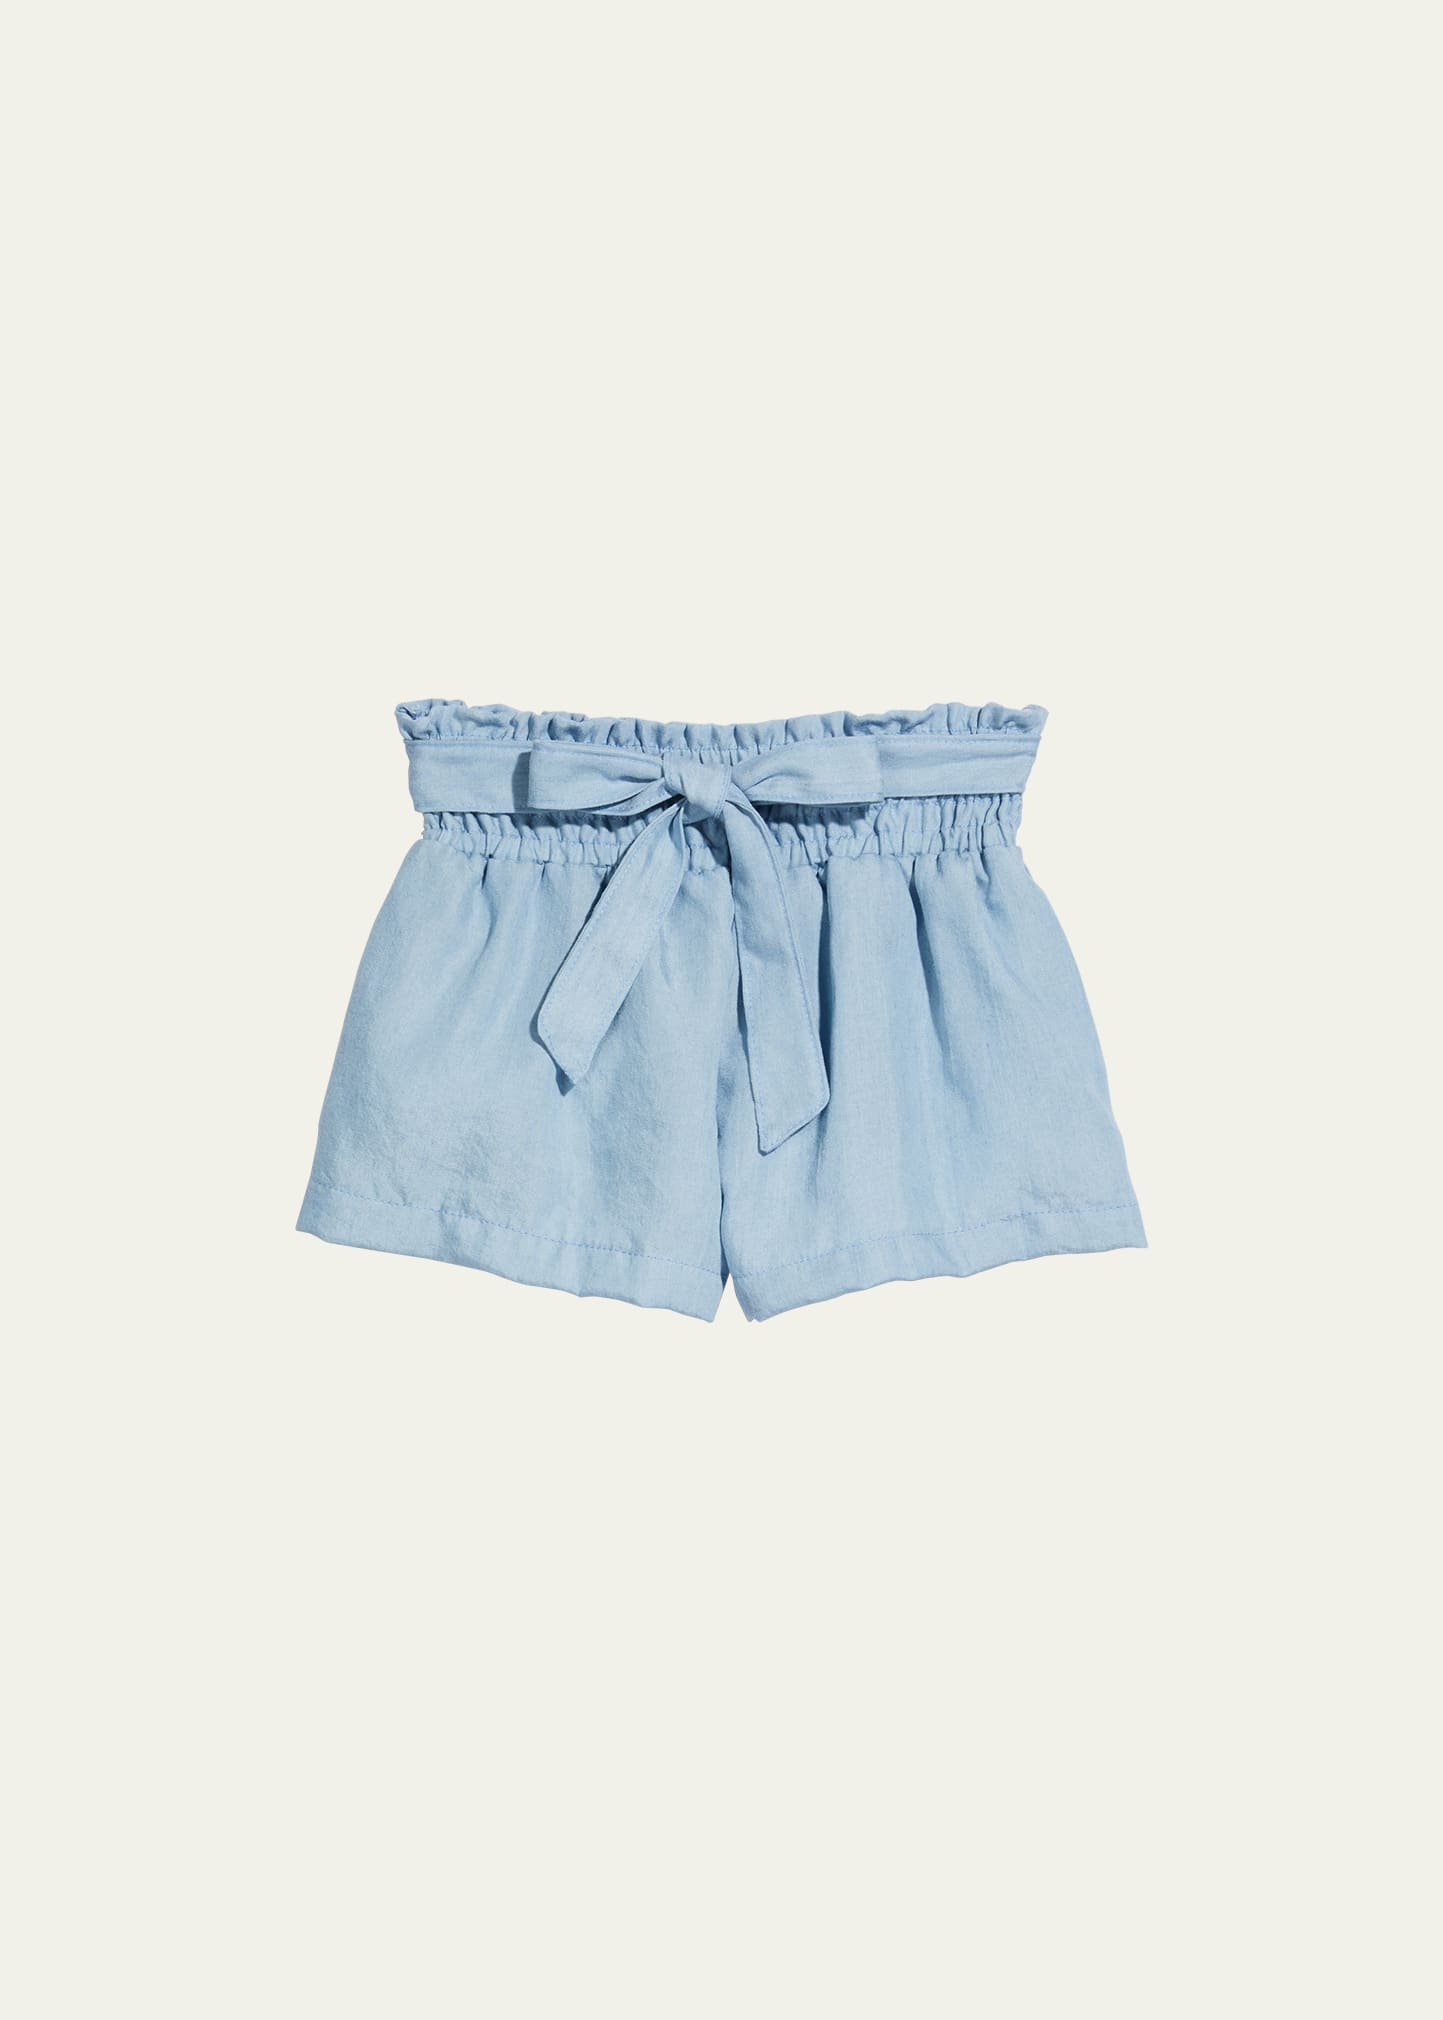 Girl's Chambray Shorts, Size S-XL